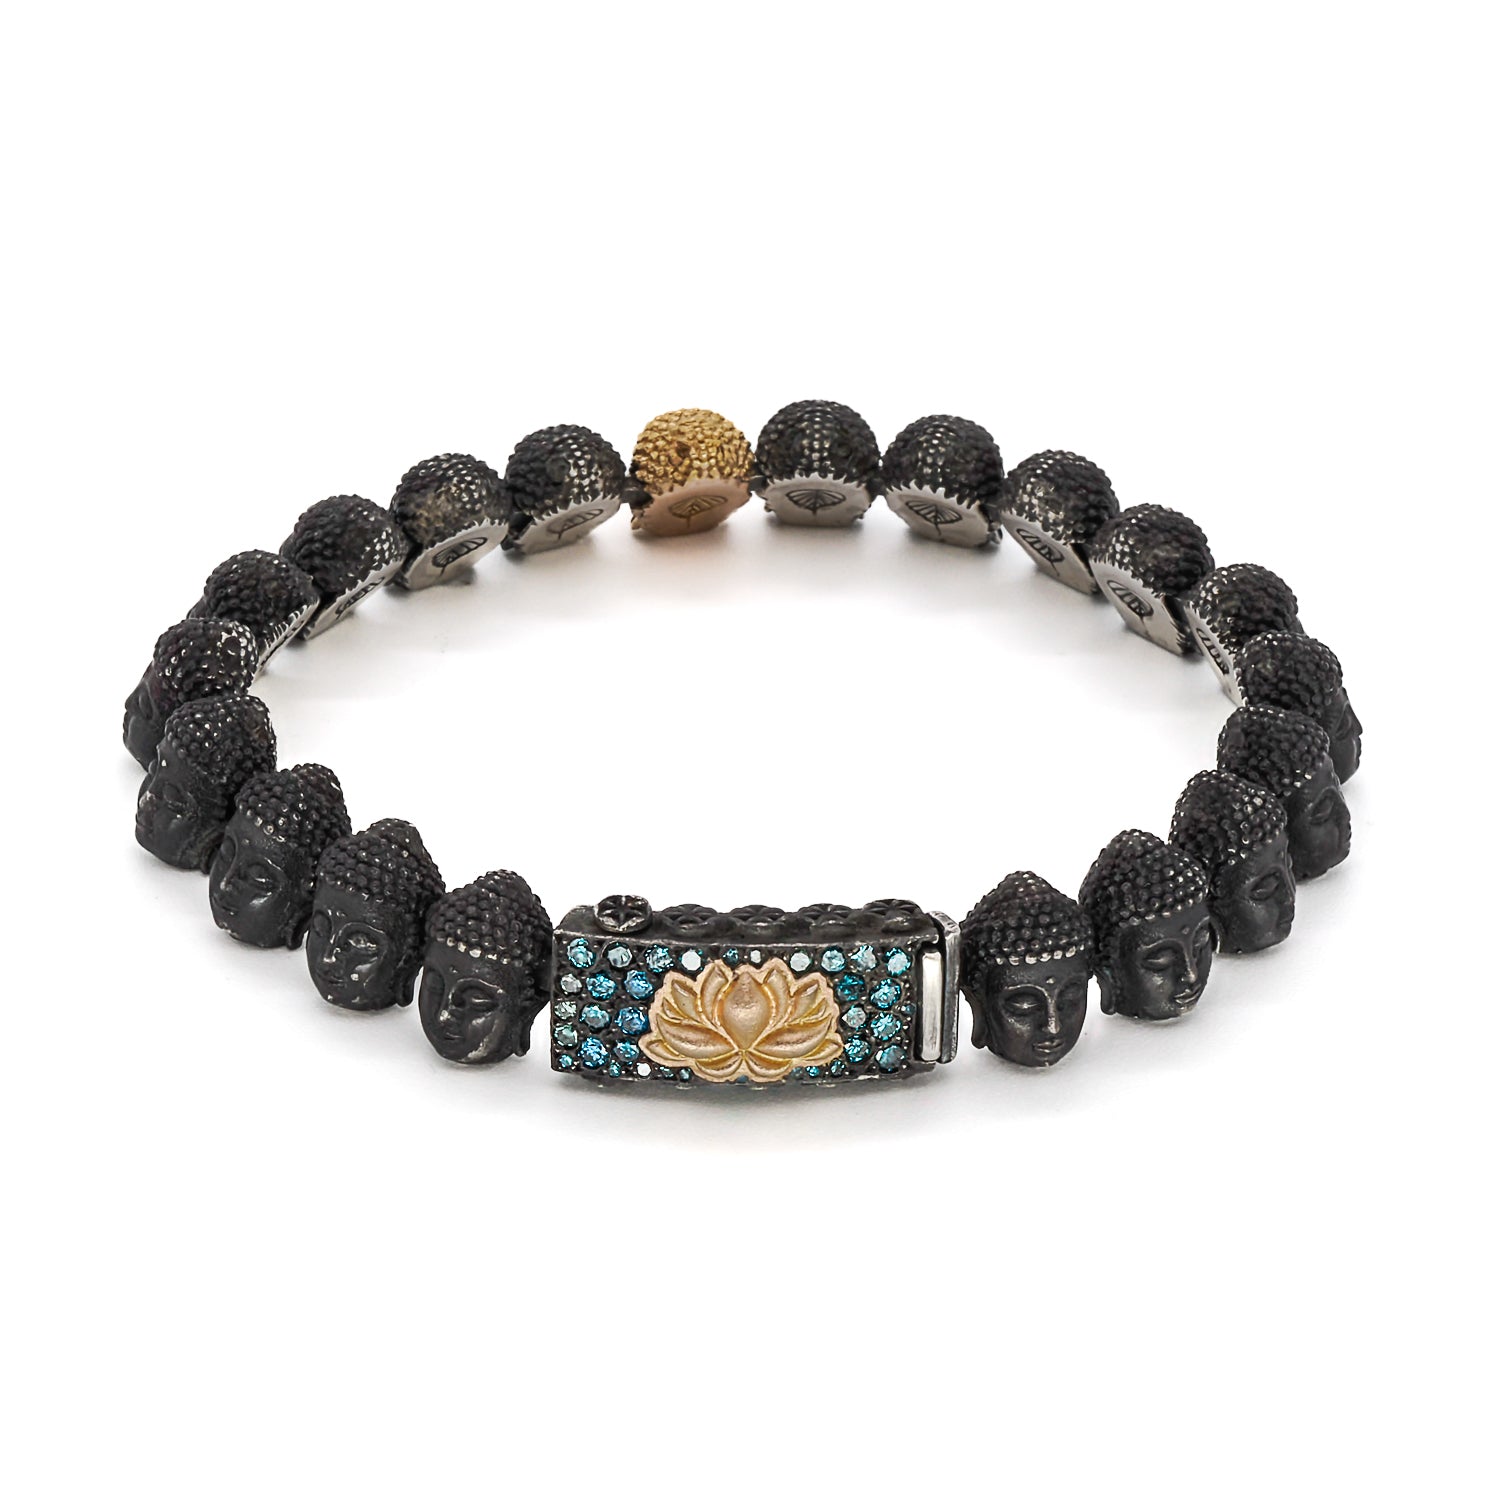 Peace Gold Lotus Silver Buddha Bracelet - Handcrafted with 0.75 Carat Blue Diamonds.